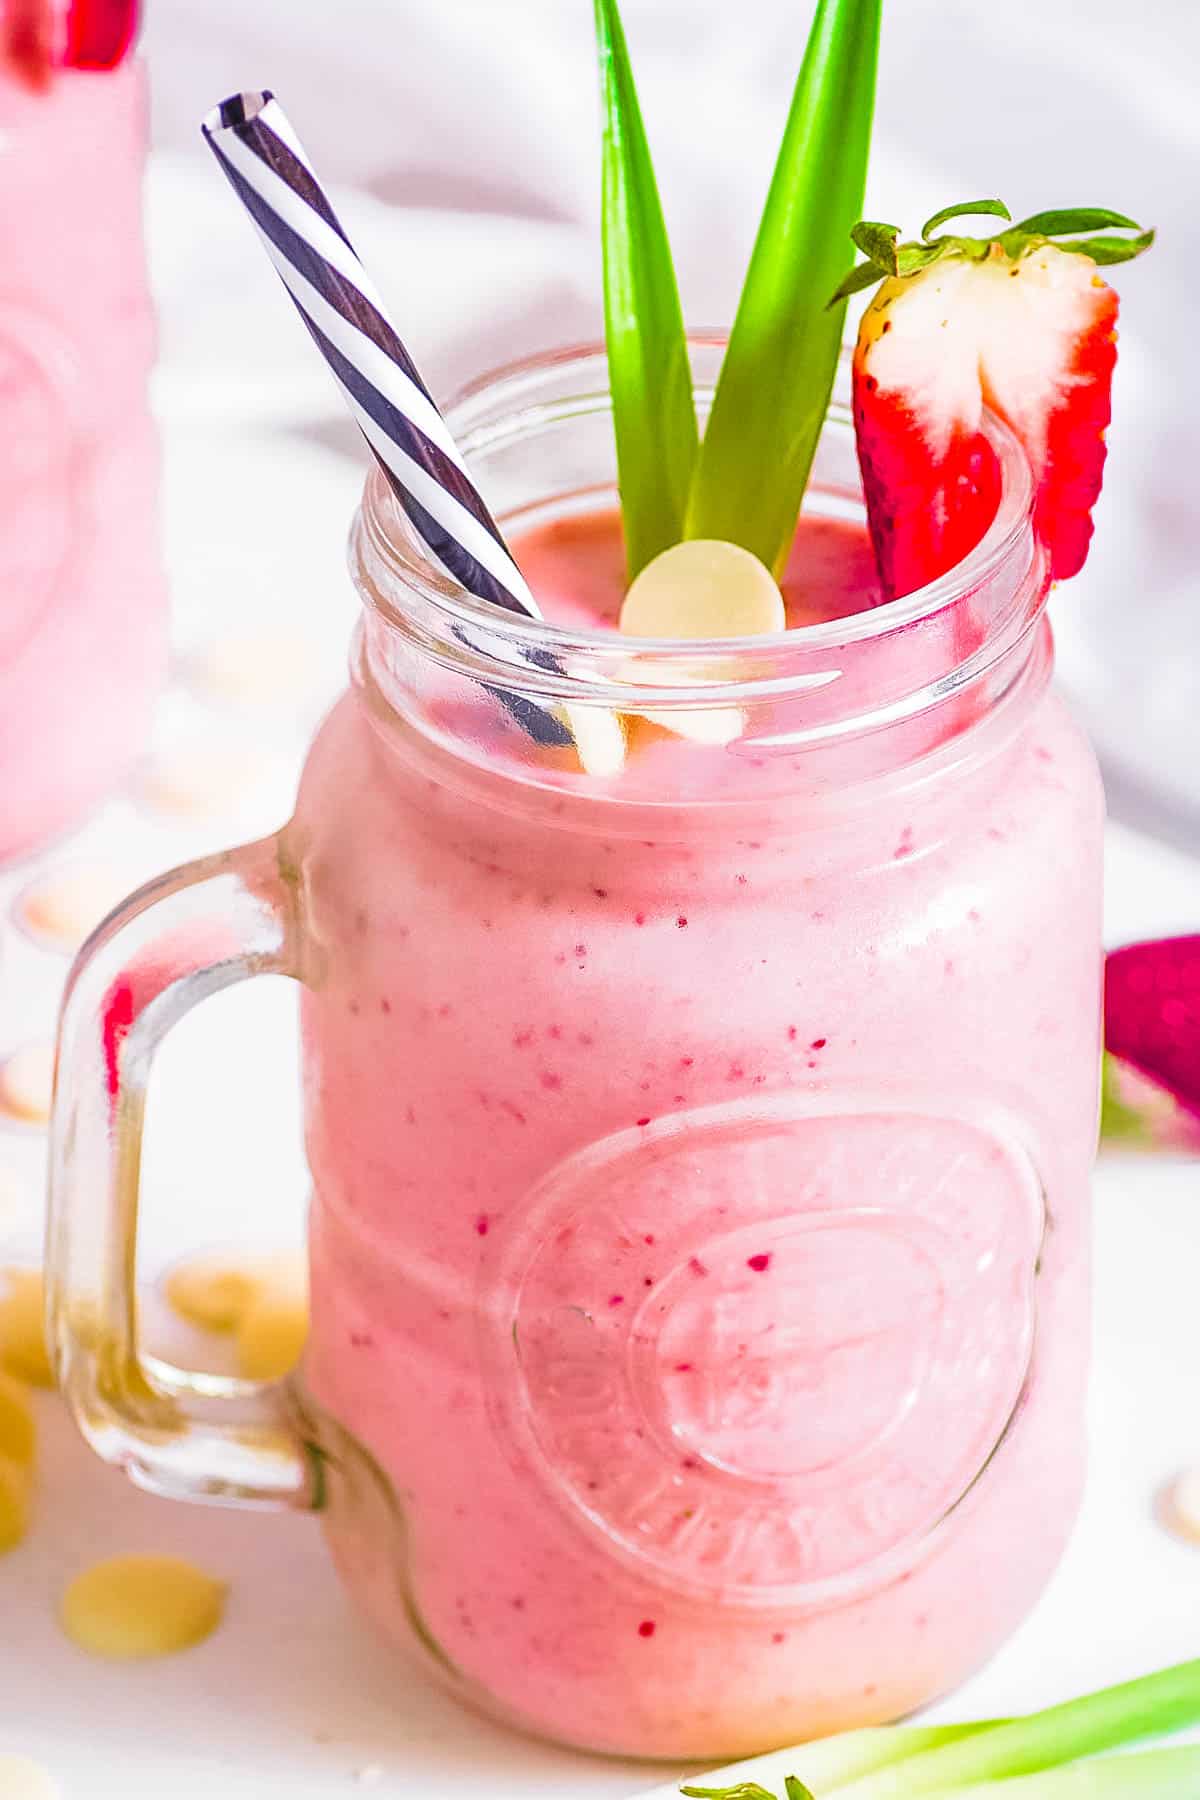 Bahama mama tropical smoothie recipe copycat in a gl، mug garnished with white c،colate and strawberries.